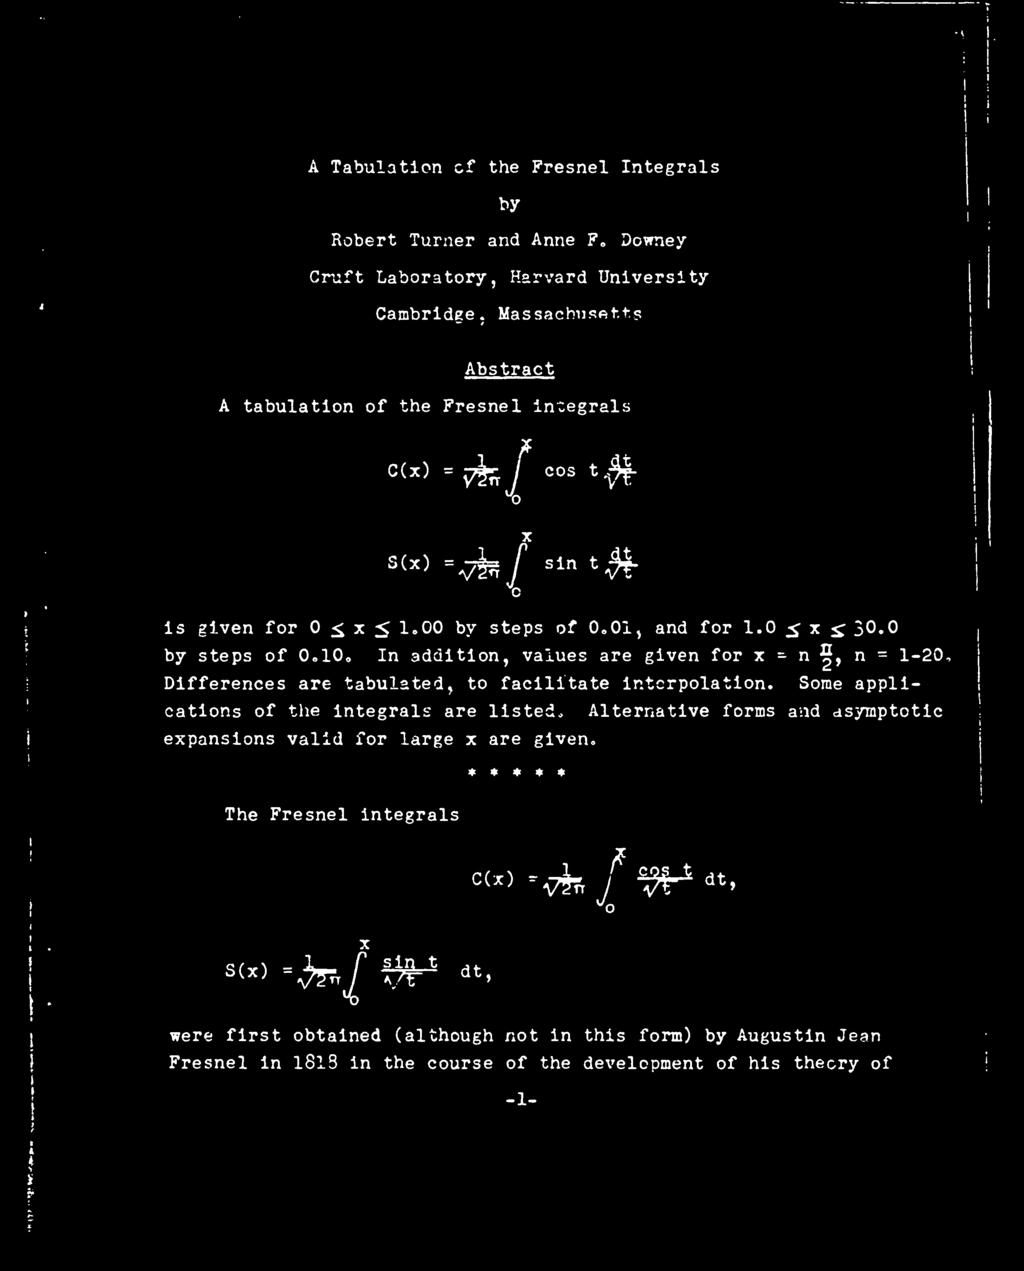 A Tabulation cf the Presnel Integrals by Robert Turner and Anne F Downey Craft Laboratory, Harvard University Cambridge.